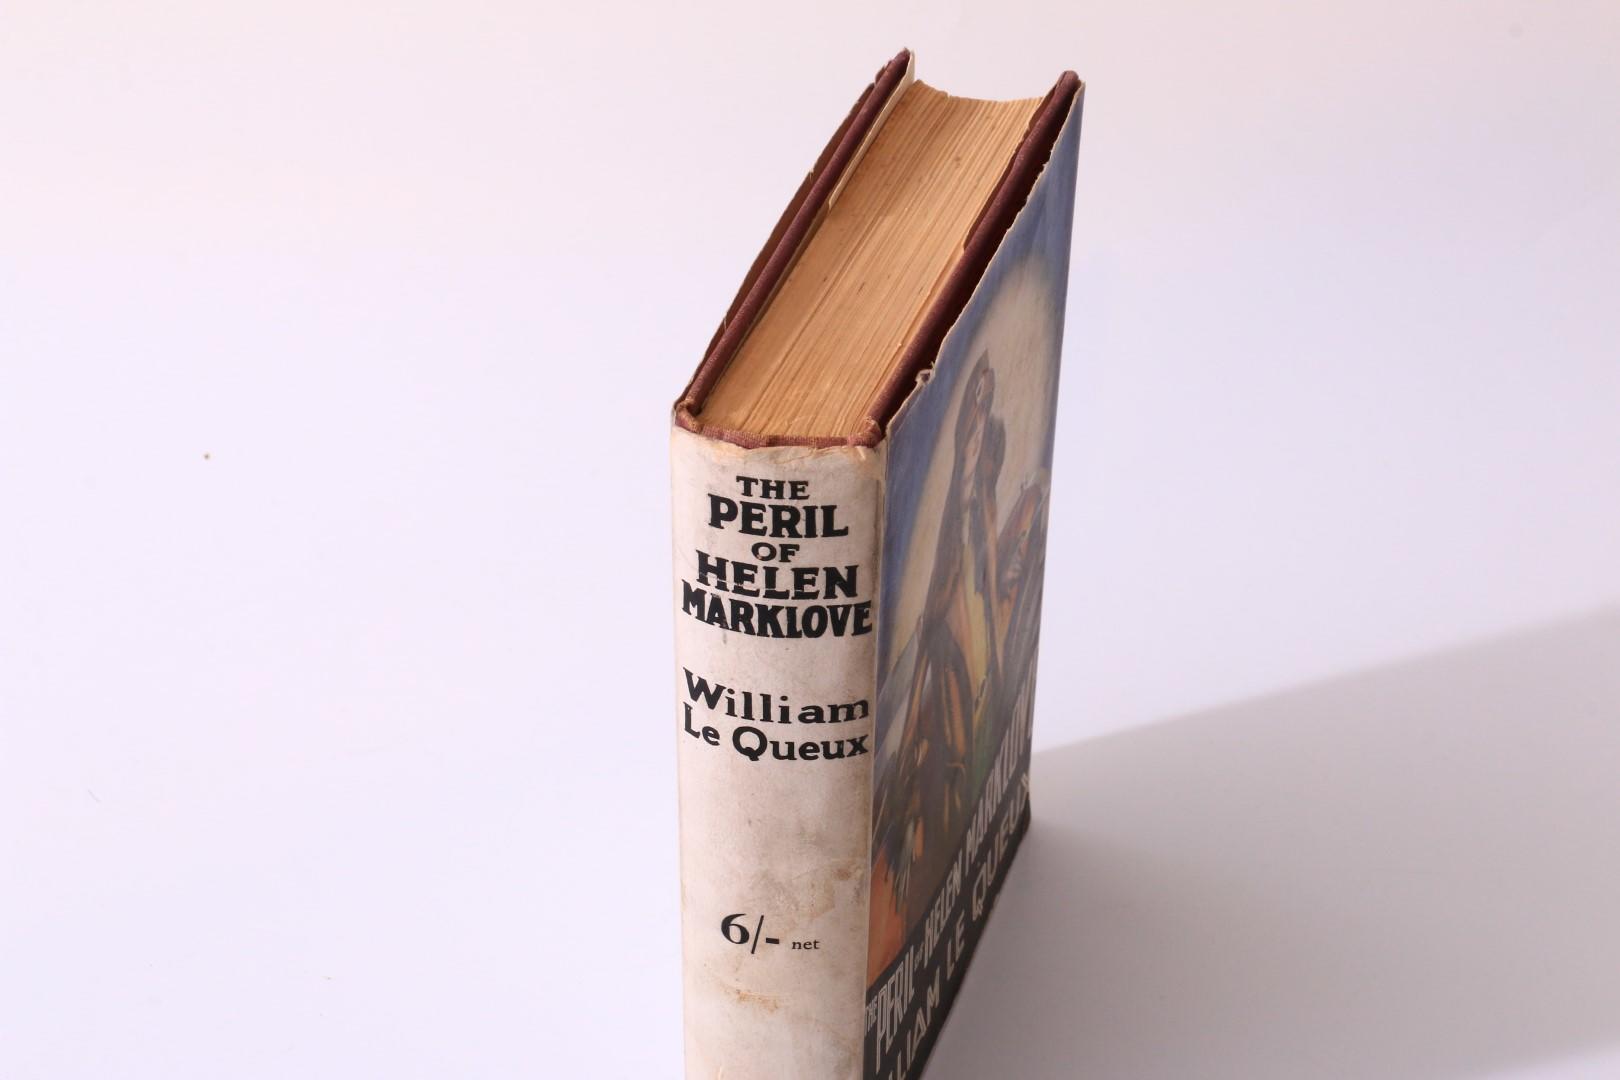 William Le Queux - The Peril of Helen Marklove - Jarrolds, n.d. [1928], First Edition.